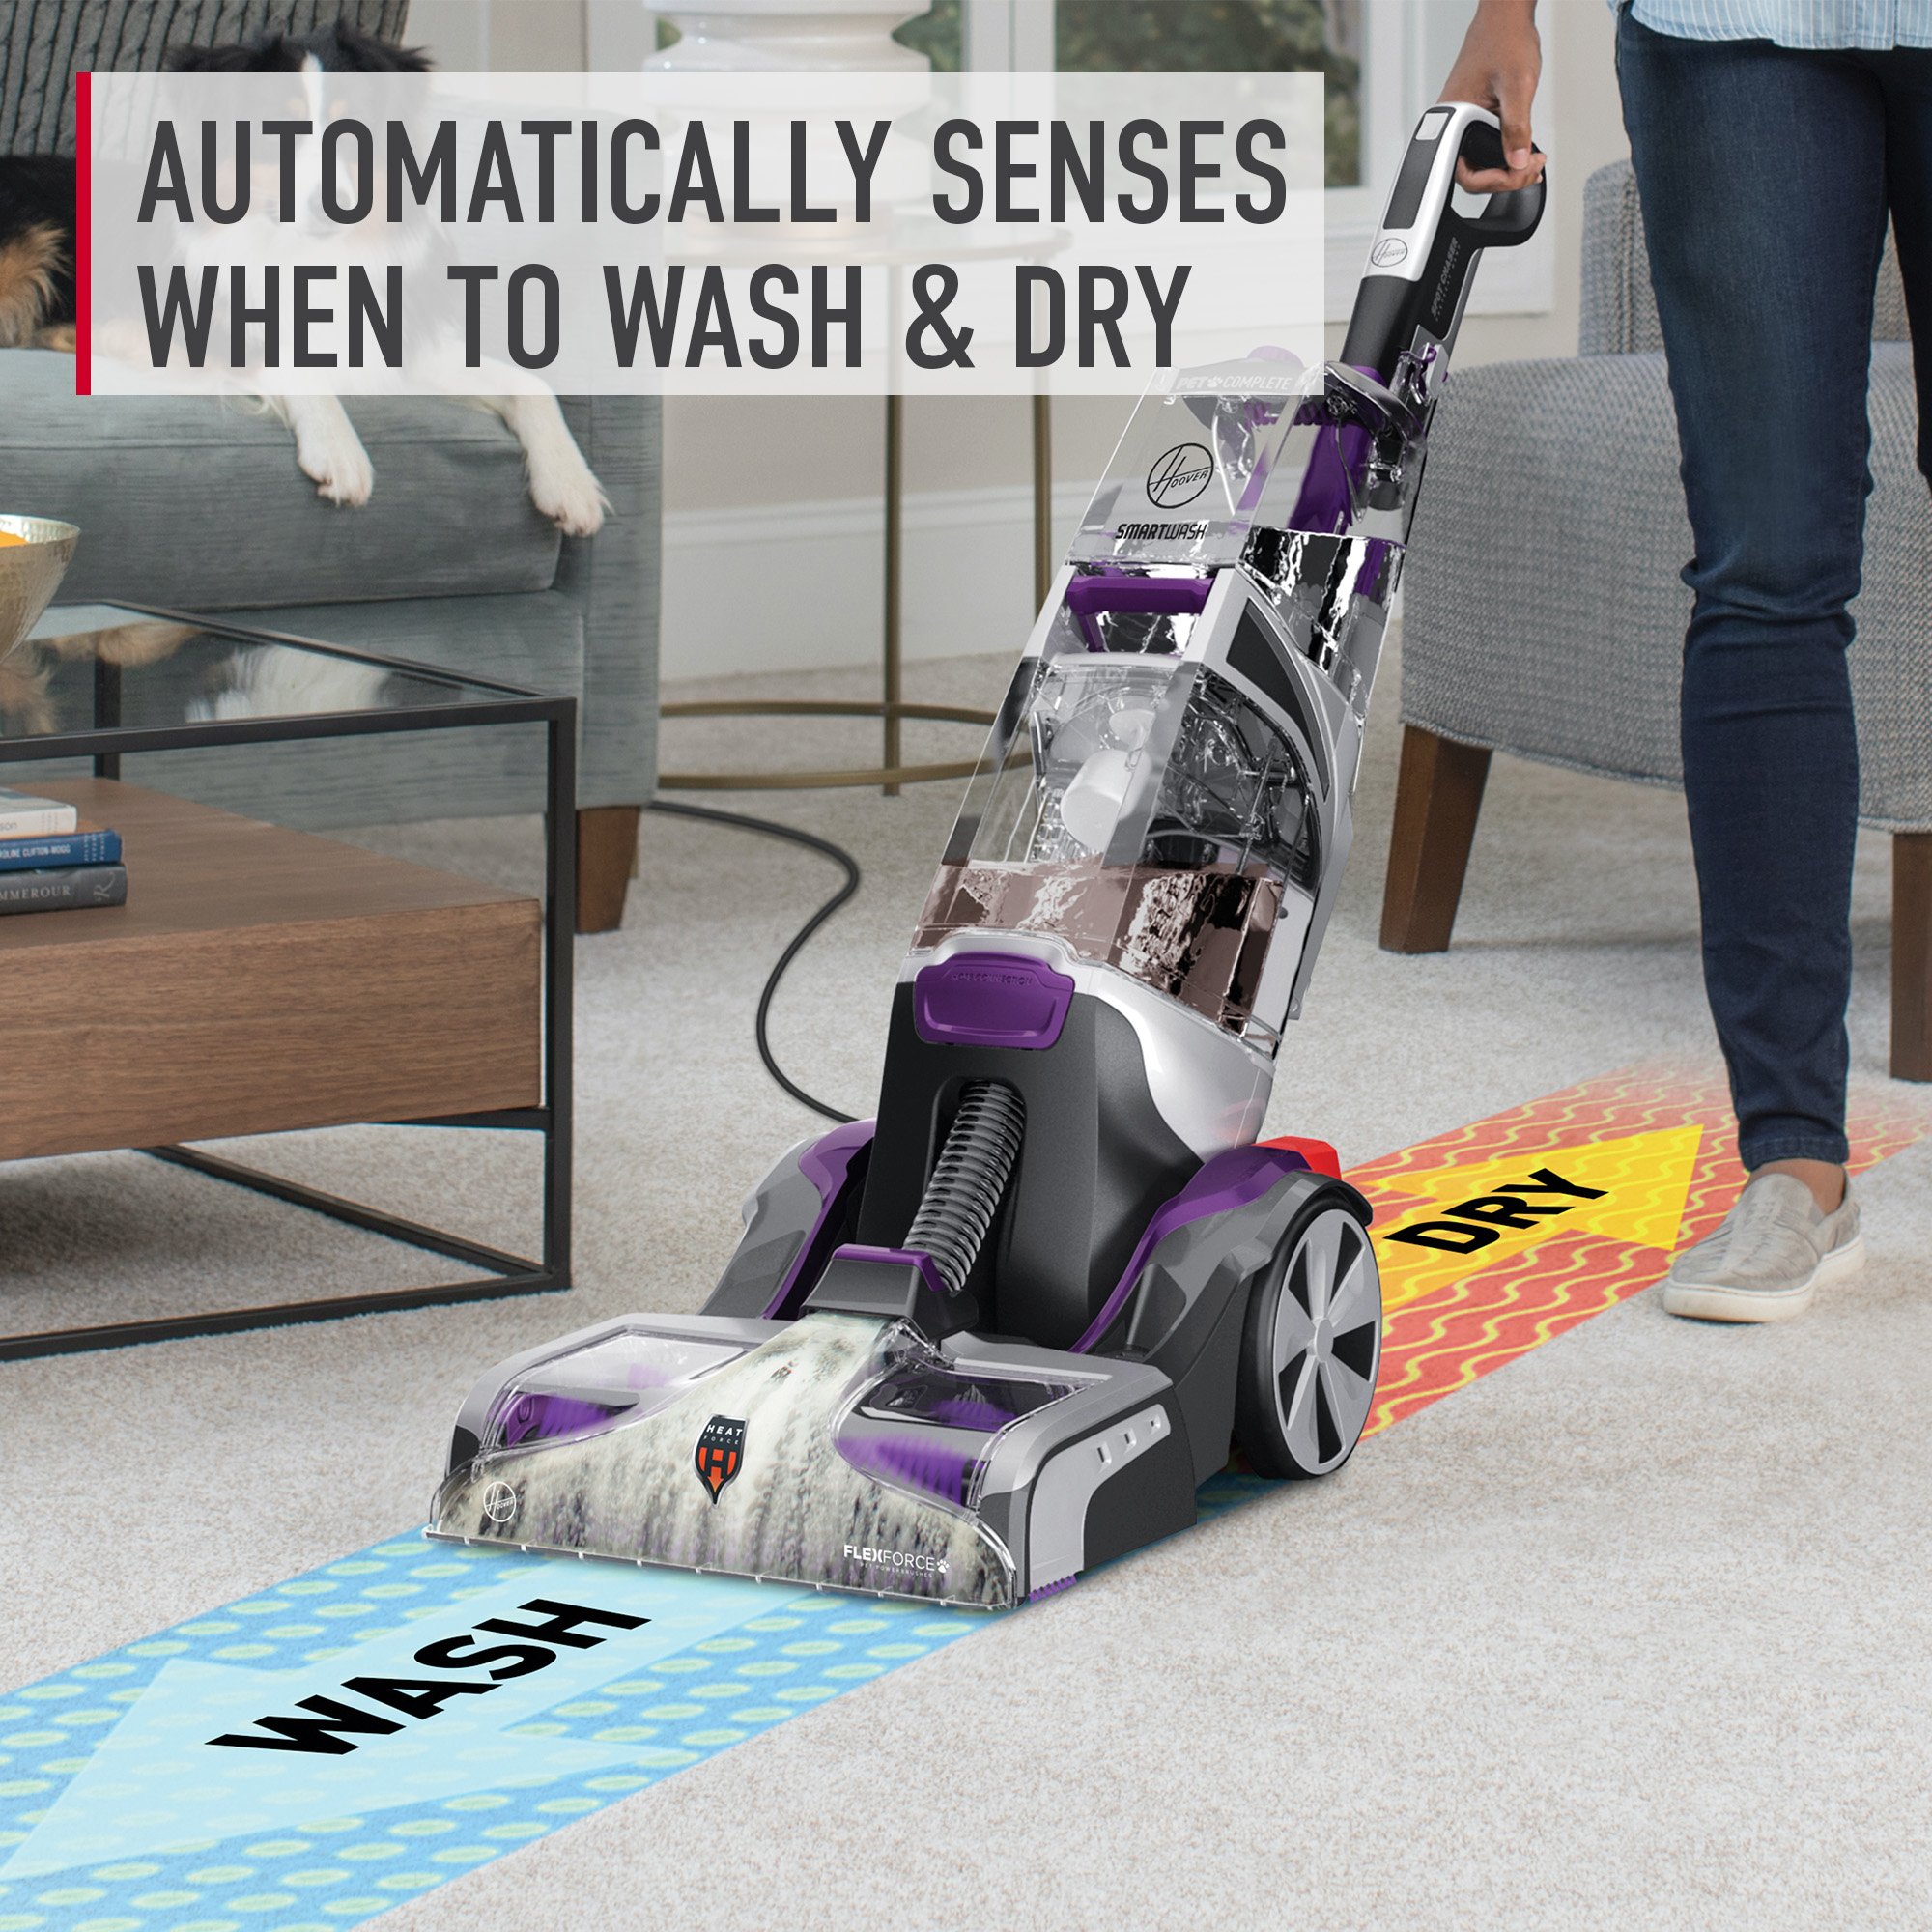 Hoover SmartWash Pet, Complete Automatic Upright Carpet Washer, FH53010 - image 3 of 9